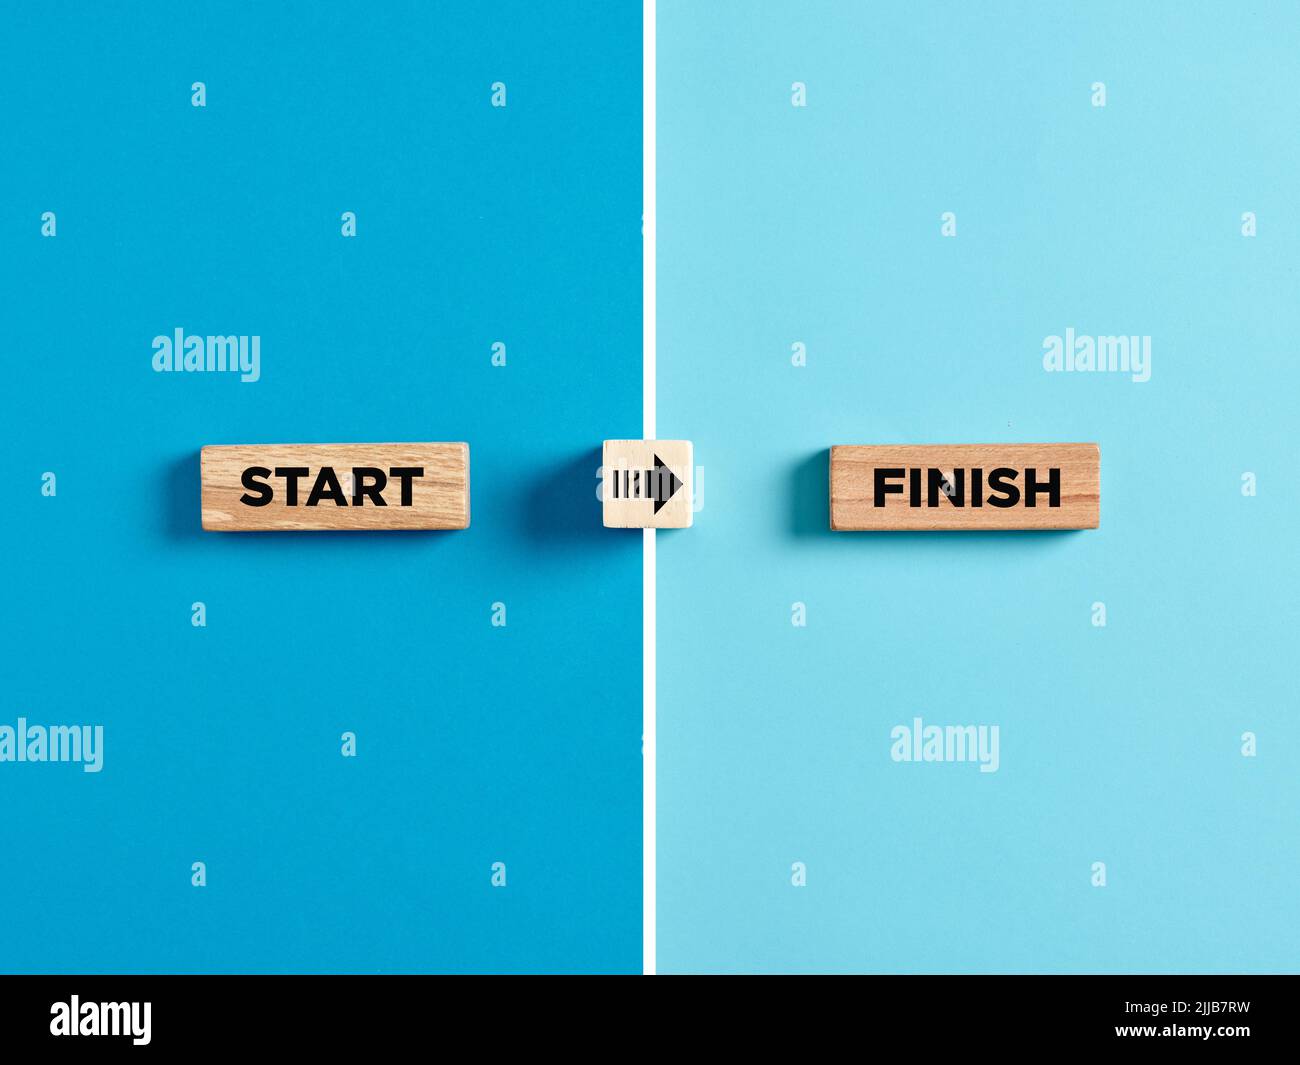 The words start and finish on wooden blocks with arrow direction symbol. Staring and finishing a job, progress or improvement in business concept. Stock Photo